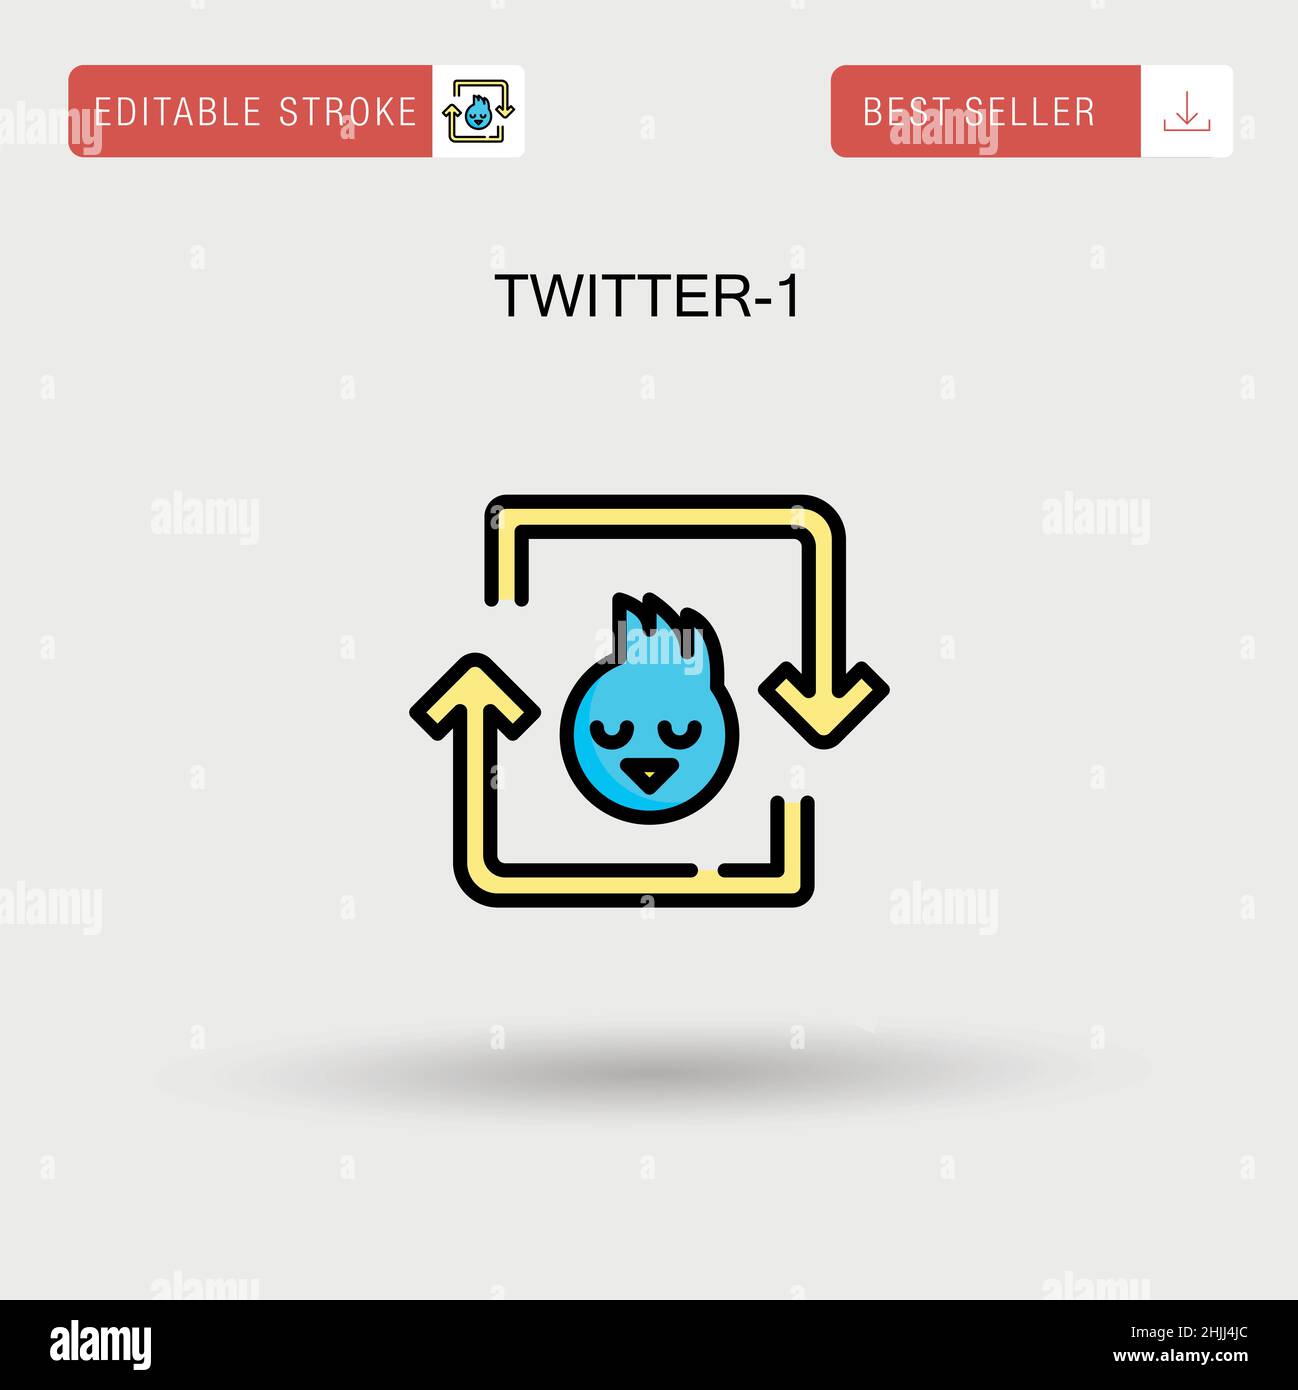 Twitter-1 Simple vector icon. Stock Vector